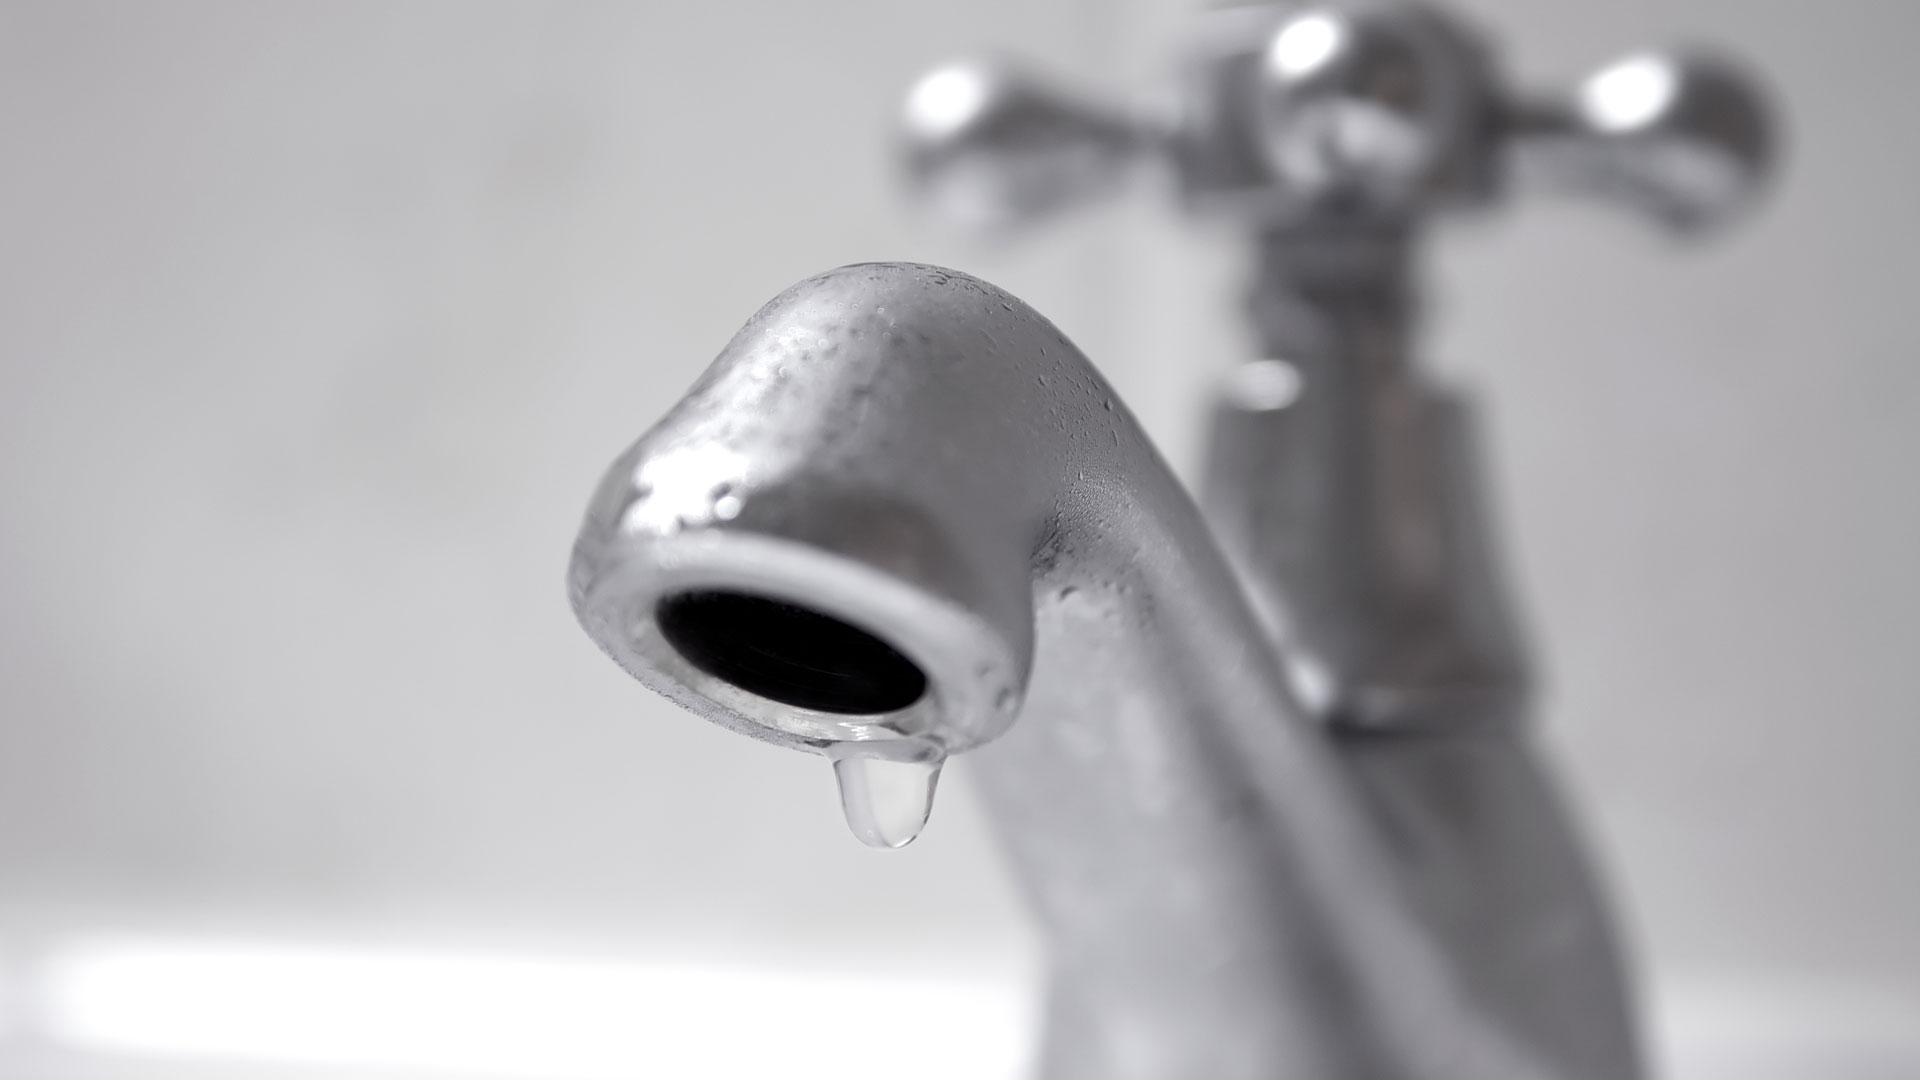 Even small faucet leaks can waste a lot of water.